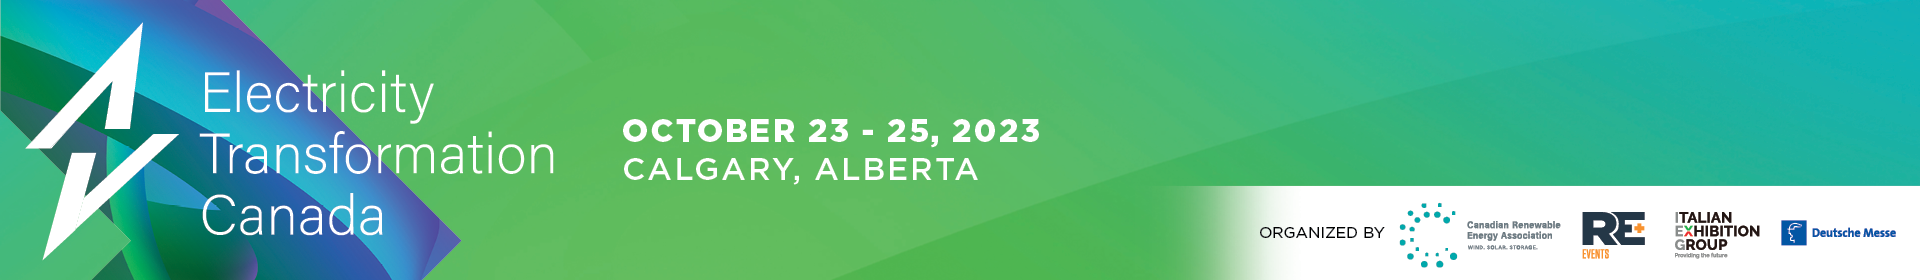 2023 Electricity Transformation Canada Event Banner